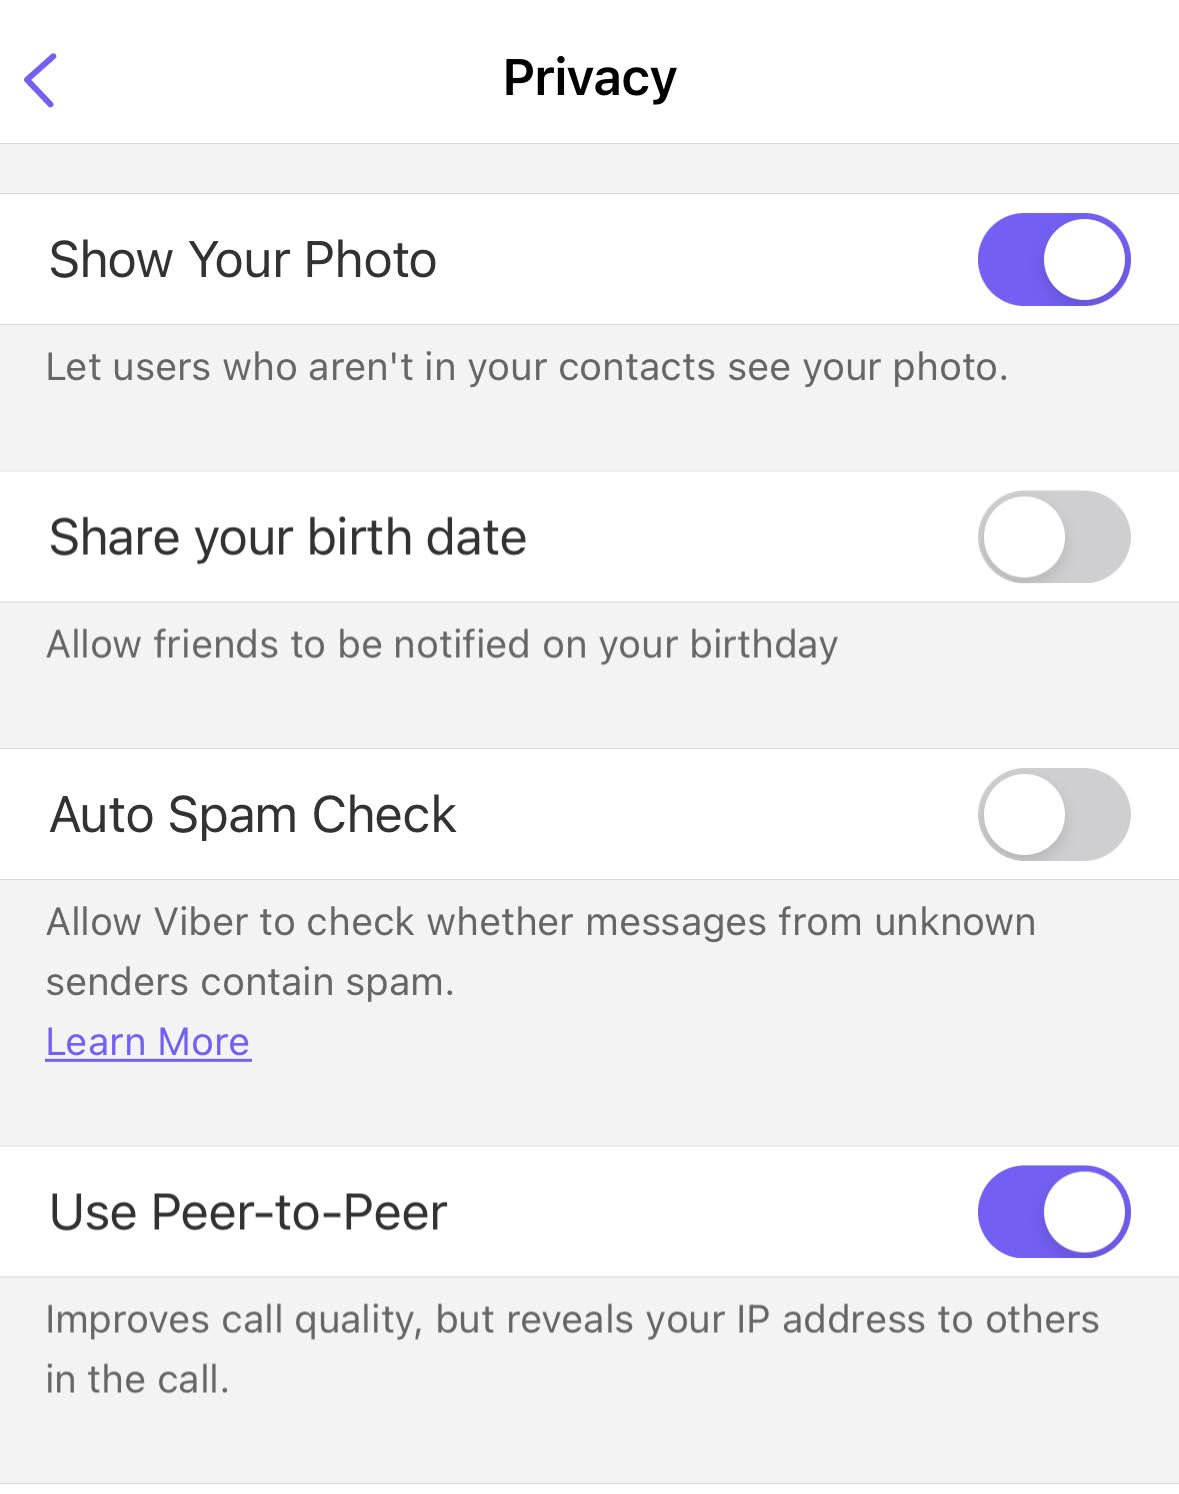 Setting in Viber to switch off peer-to-peer calls.